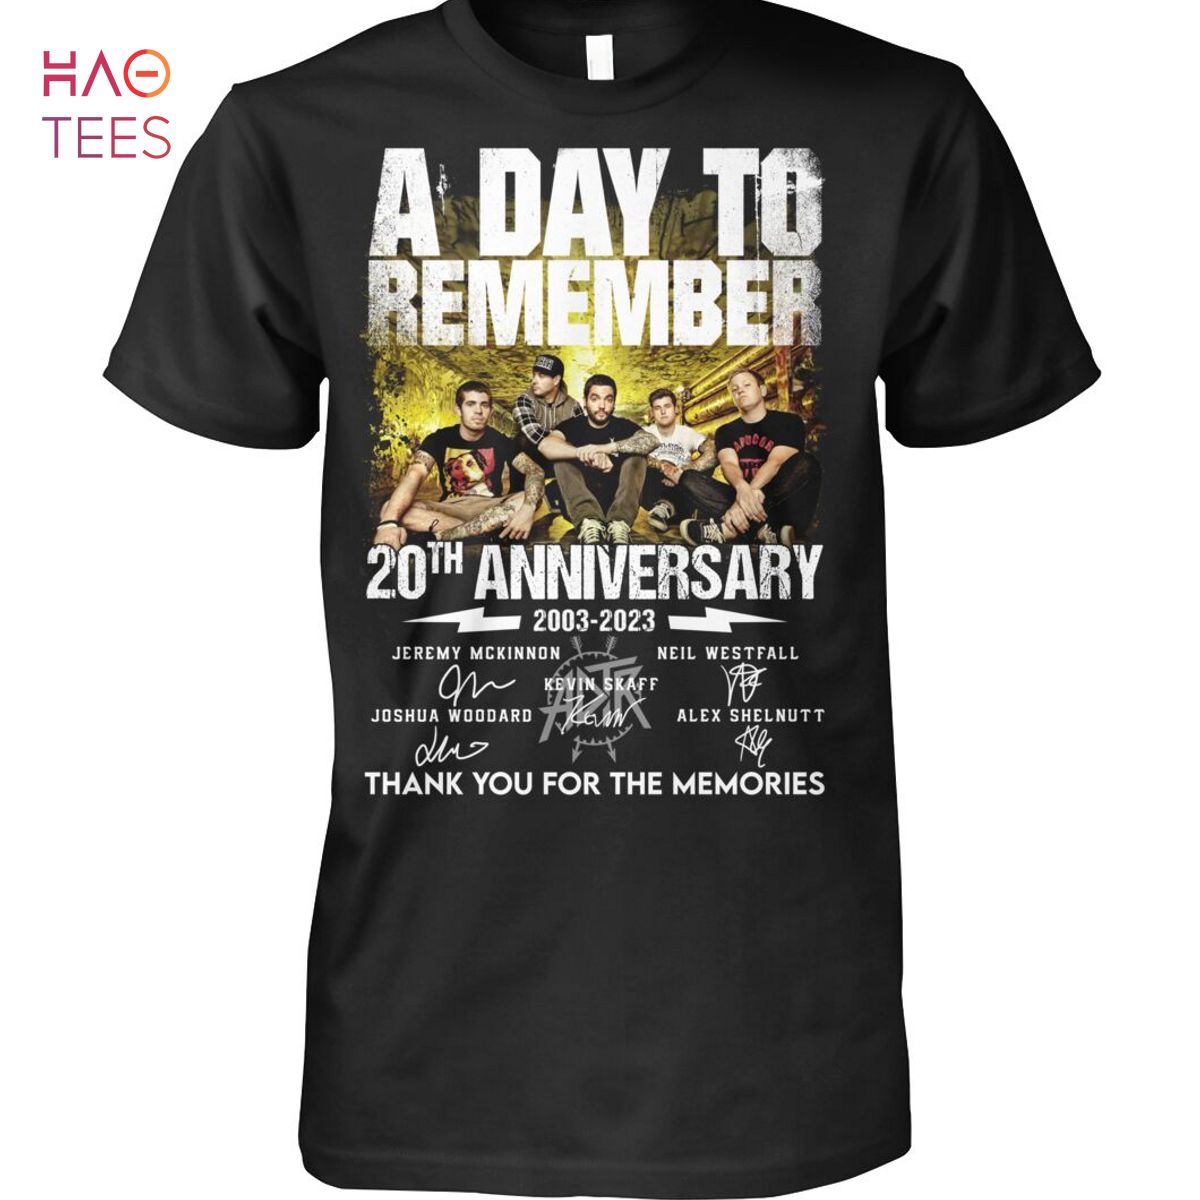 A Day to Remember 20 Anniversary Shirt